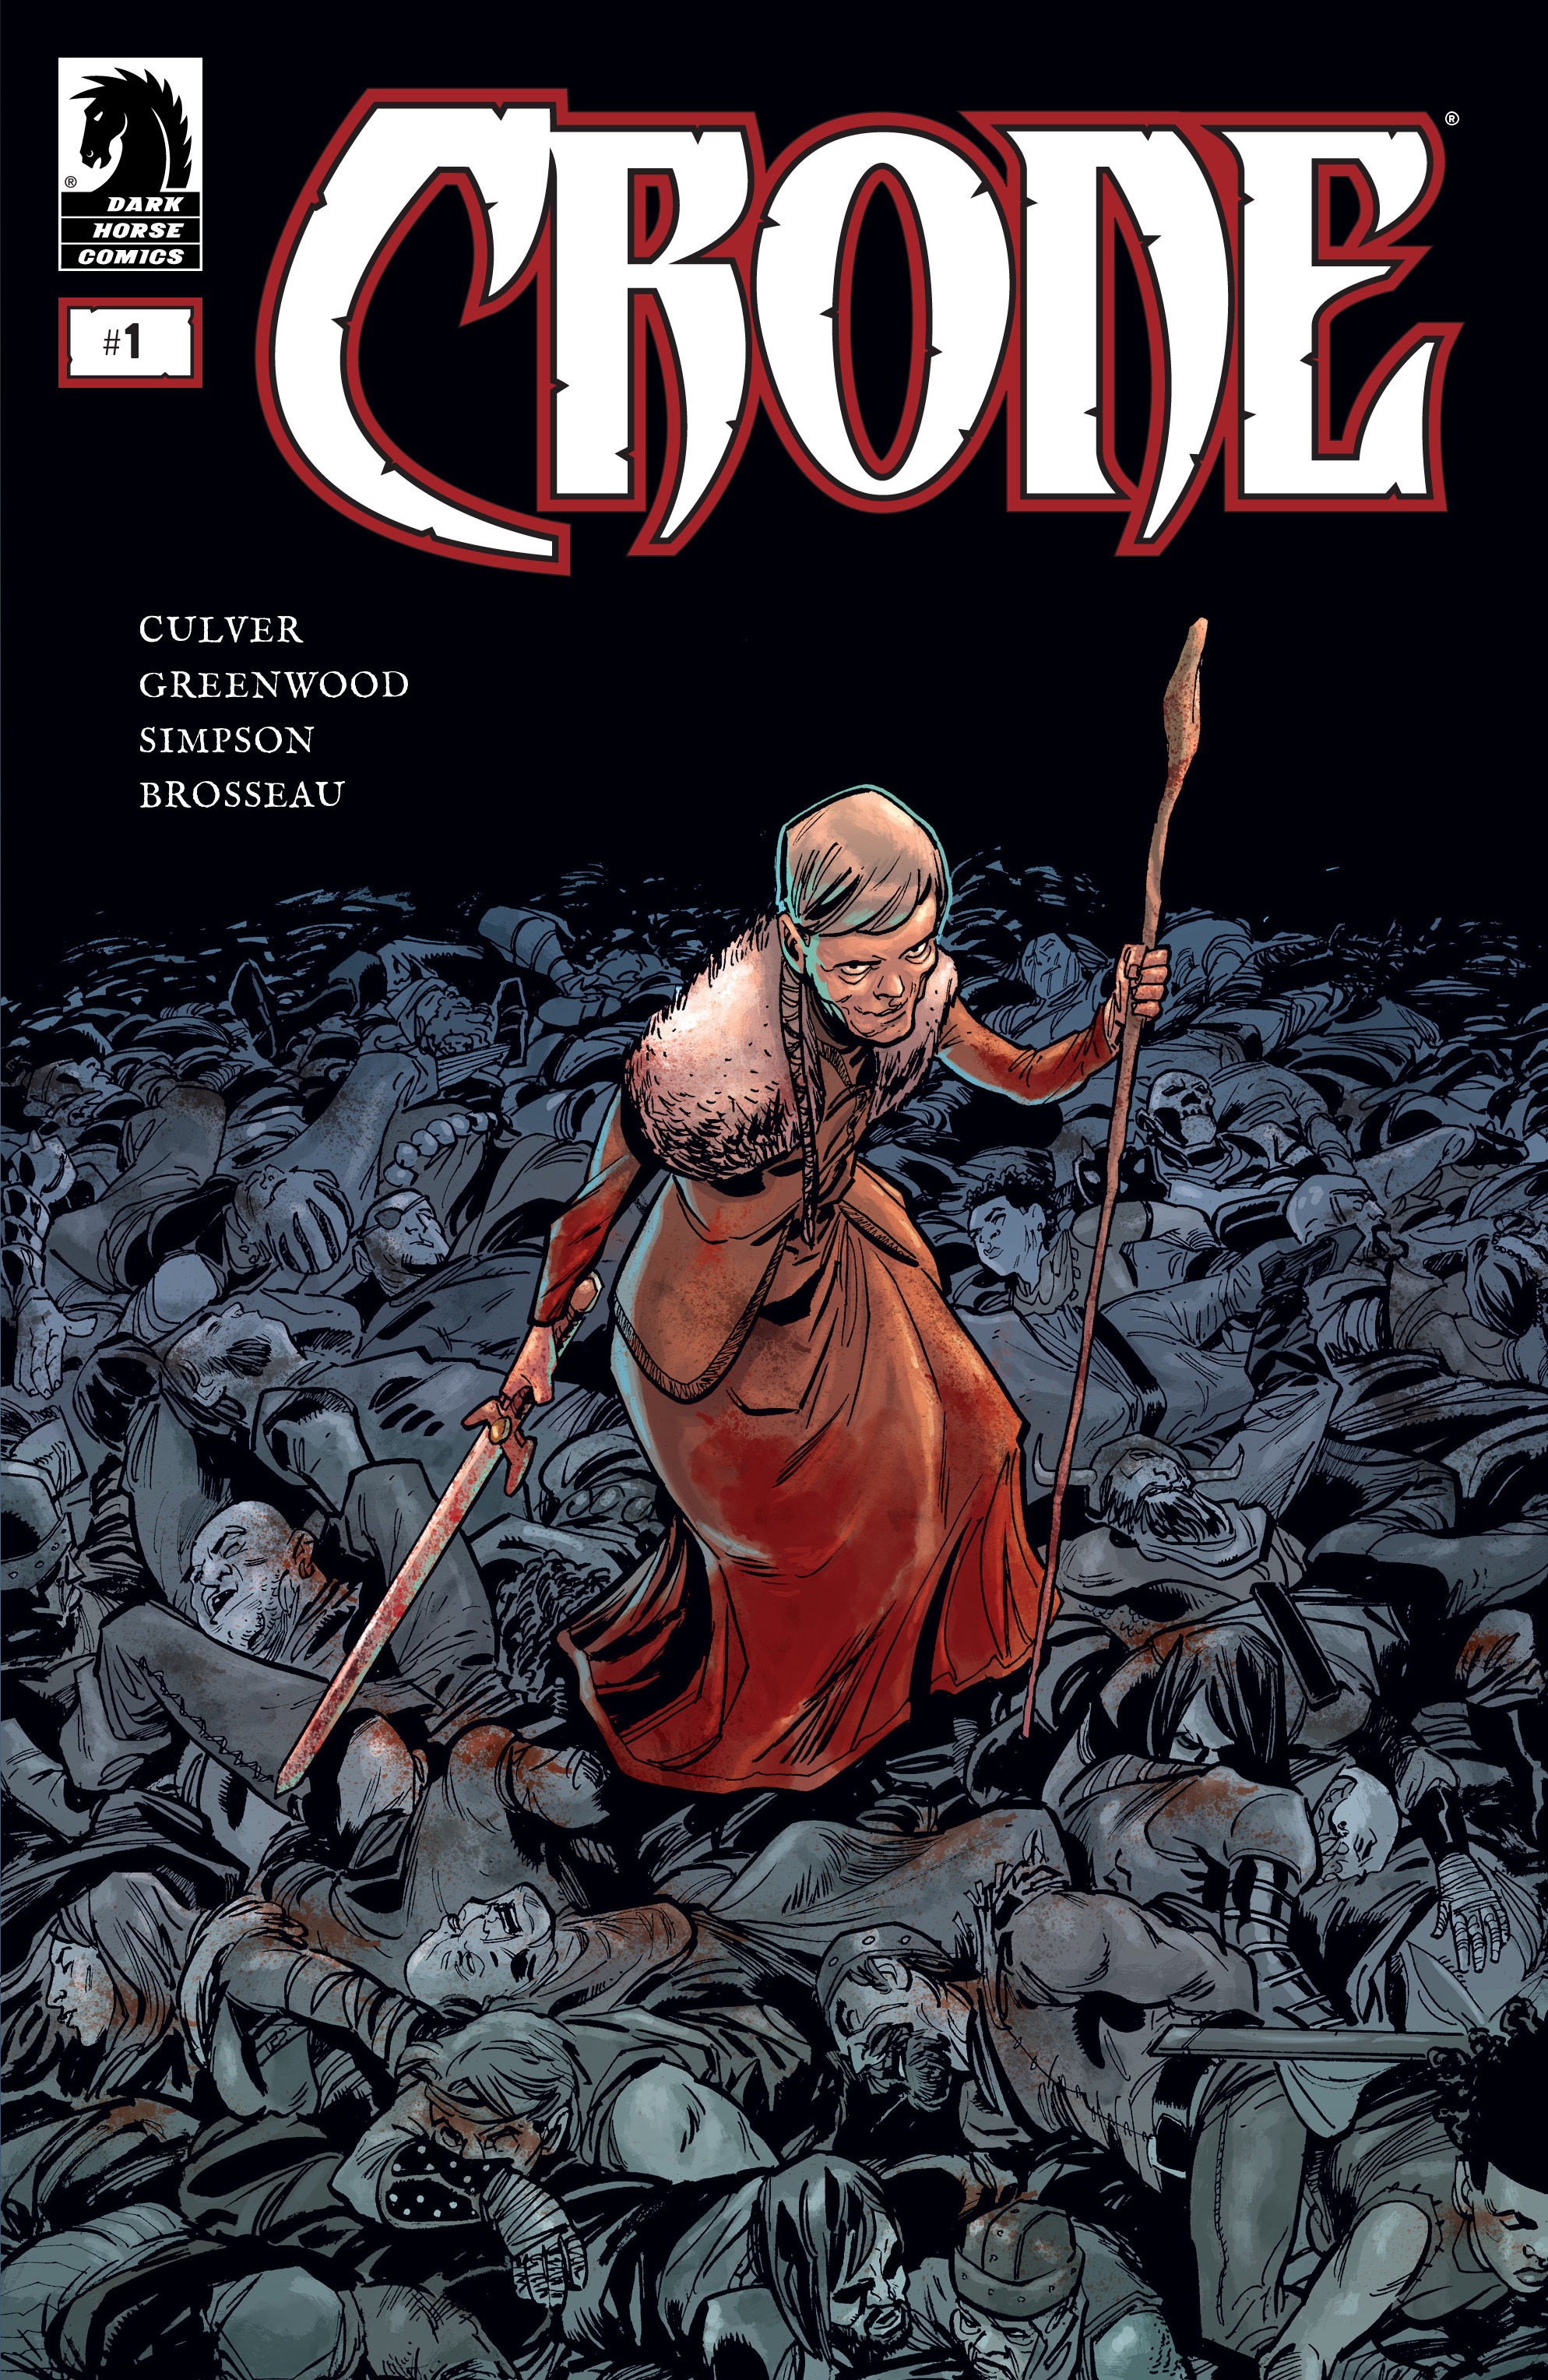 Read online Crone comic -  Issue #1 - 1